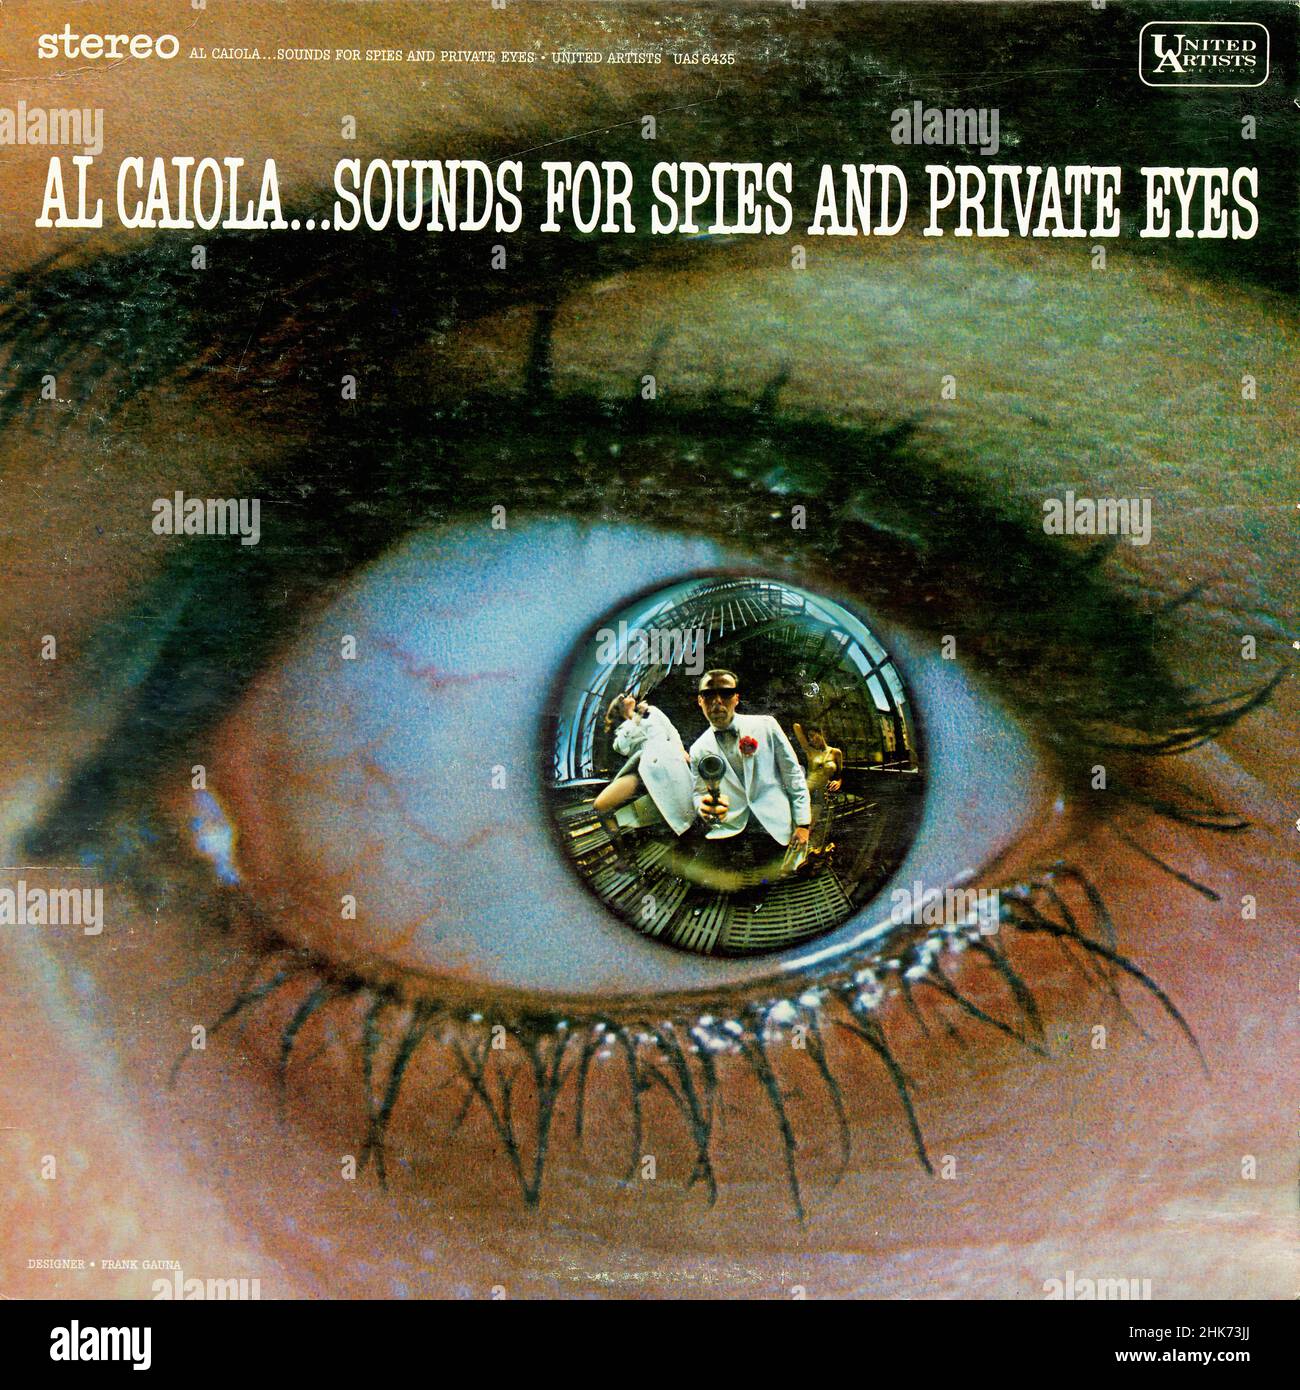 Sounds For Spies And Private Eyes -  Vintage Soundtrack Vinyl Album Stock Photo